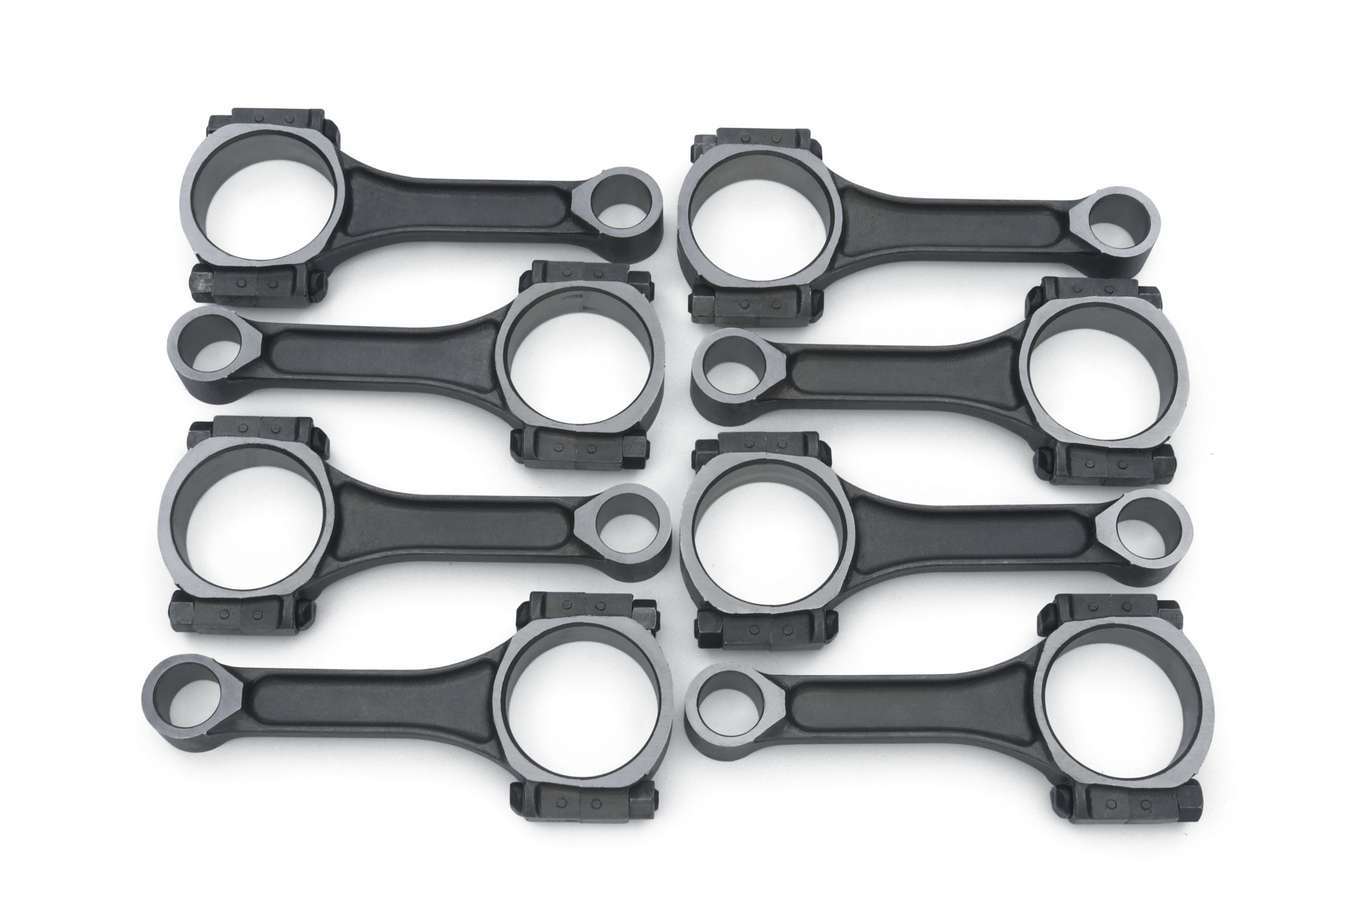 GM Performance, Connecting Rod,  I Beam,  5.700" Long,  Press Fit,  3/8" Cap Screws,  Powdered Metal,  Small Block Chevy,  Set